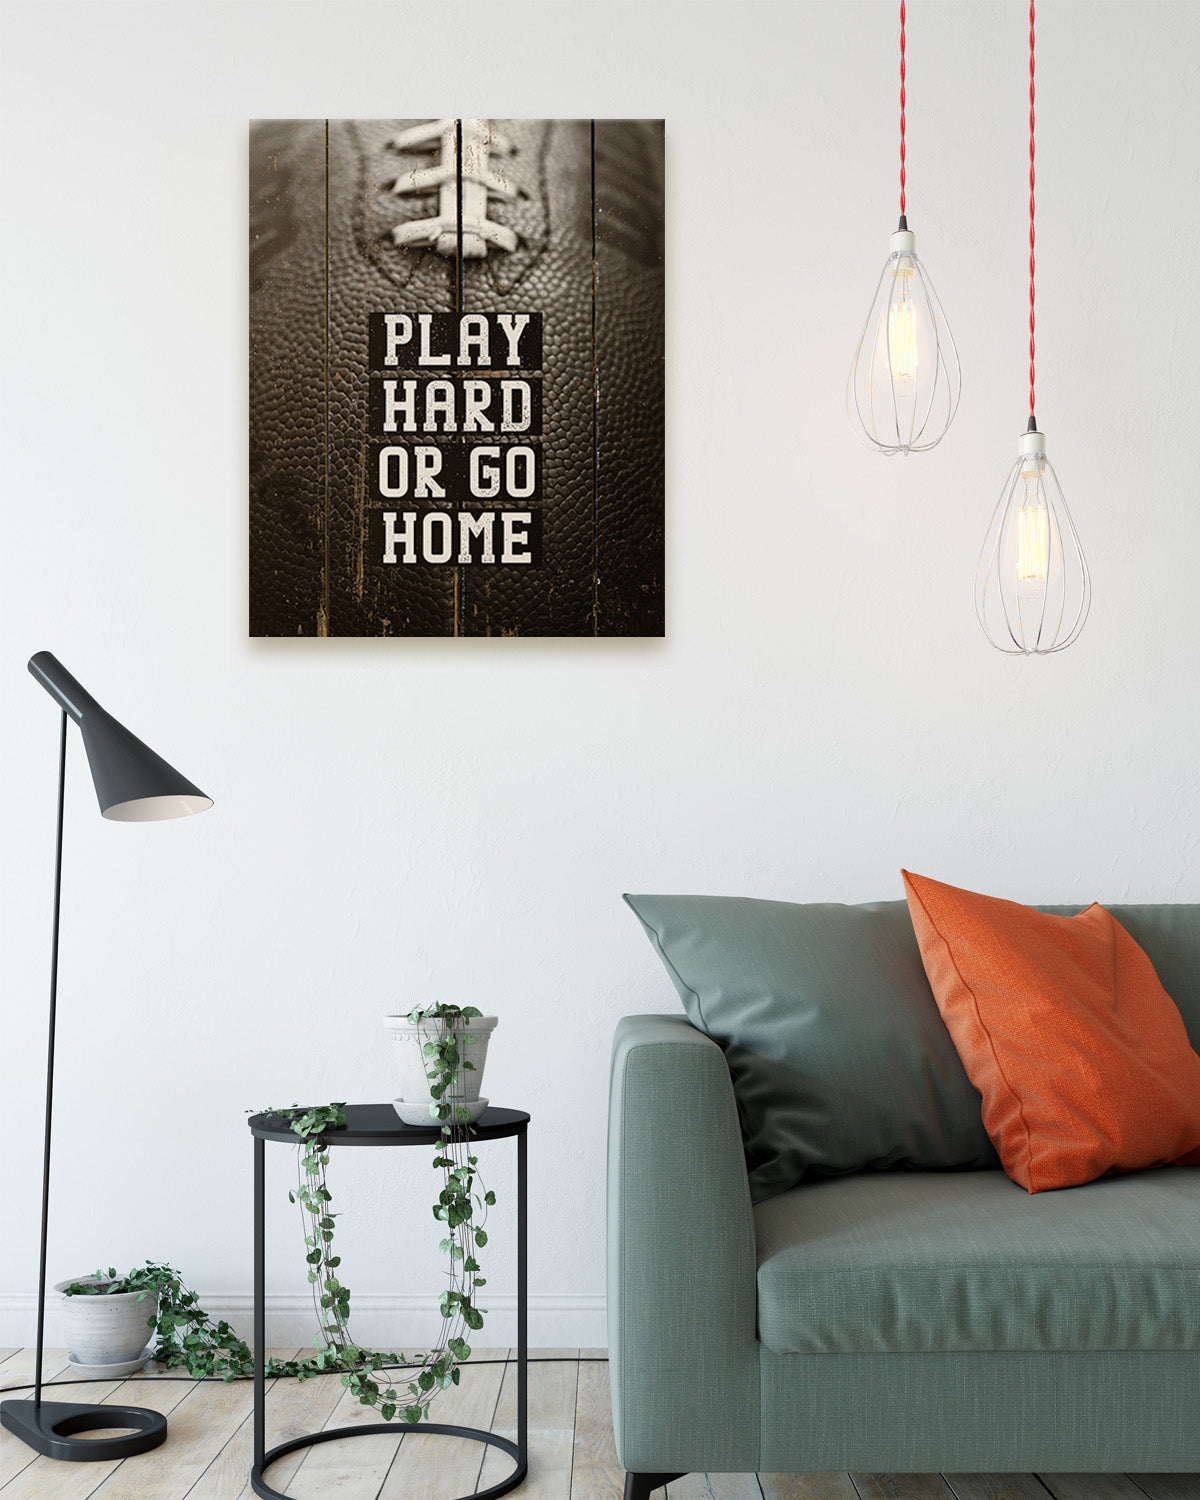 Play Hard Or Go Home Teen Room Decor - Inspirational Wall Art for Boys, Kids Room, Family or Game Room, Man Cave, Den - Home Decor Gift for Sports Fans, Football Players